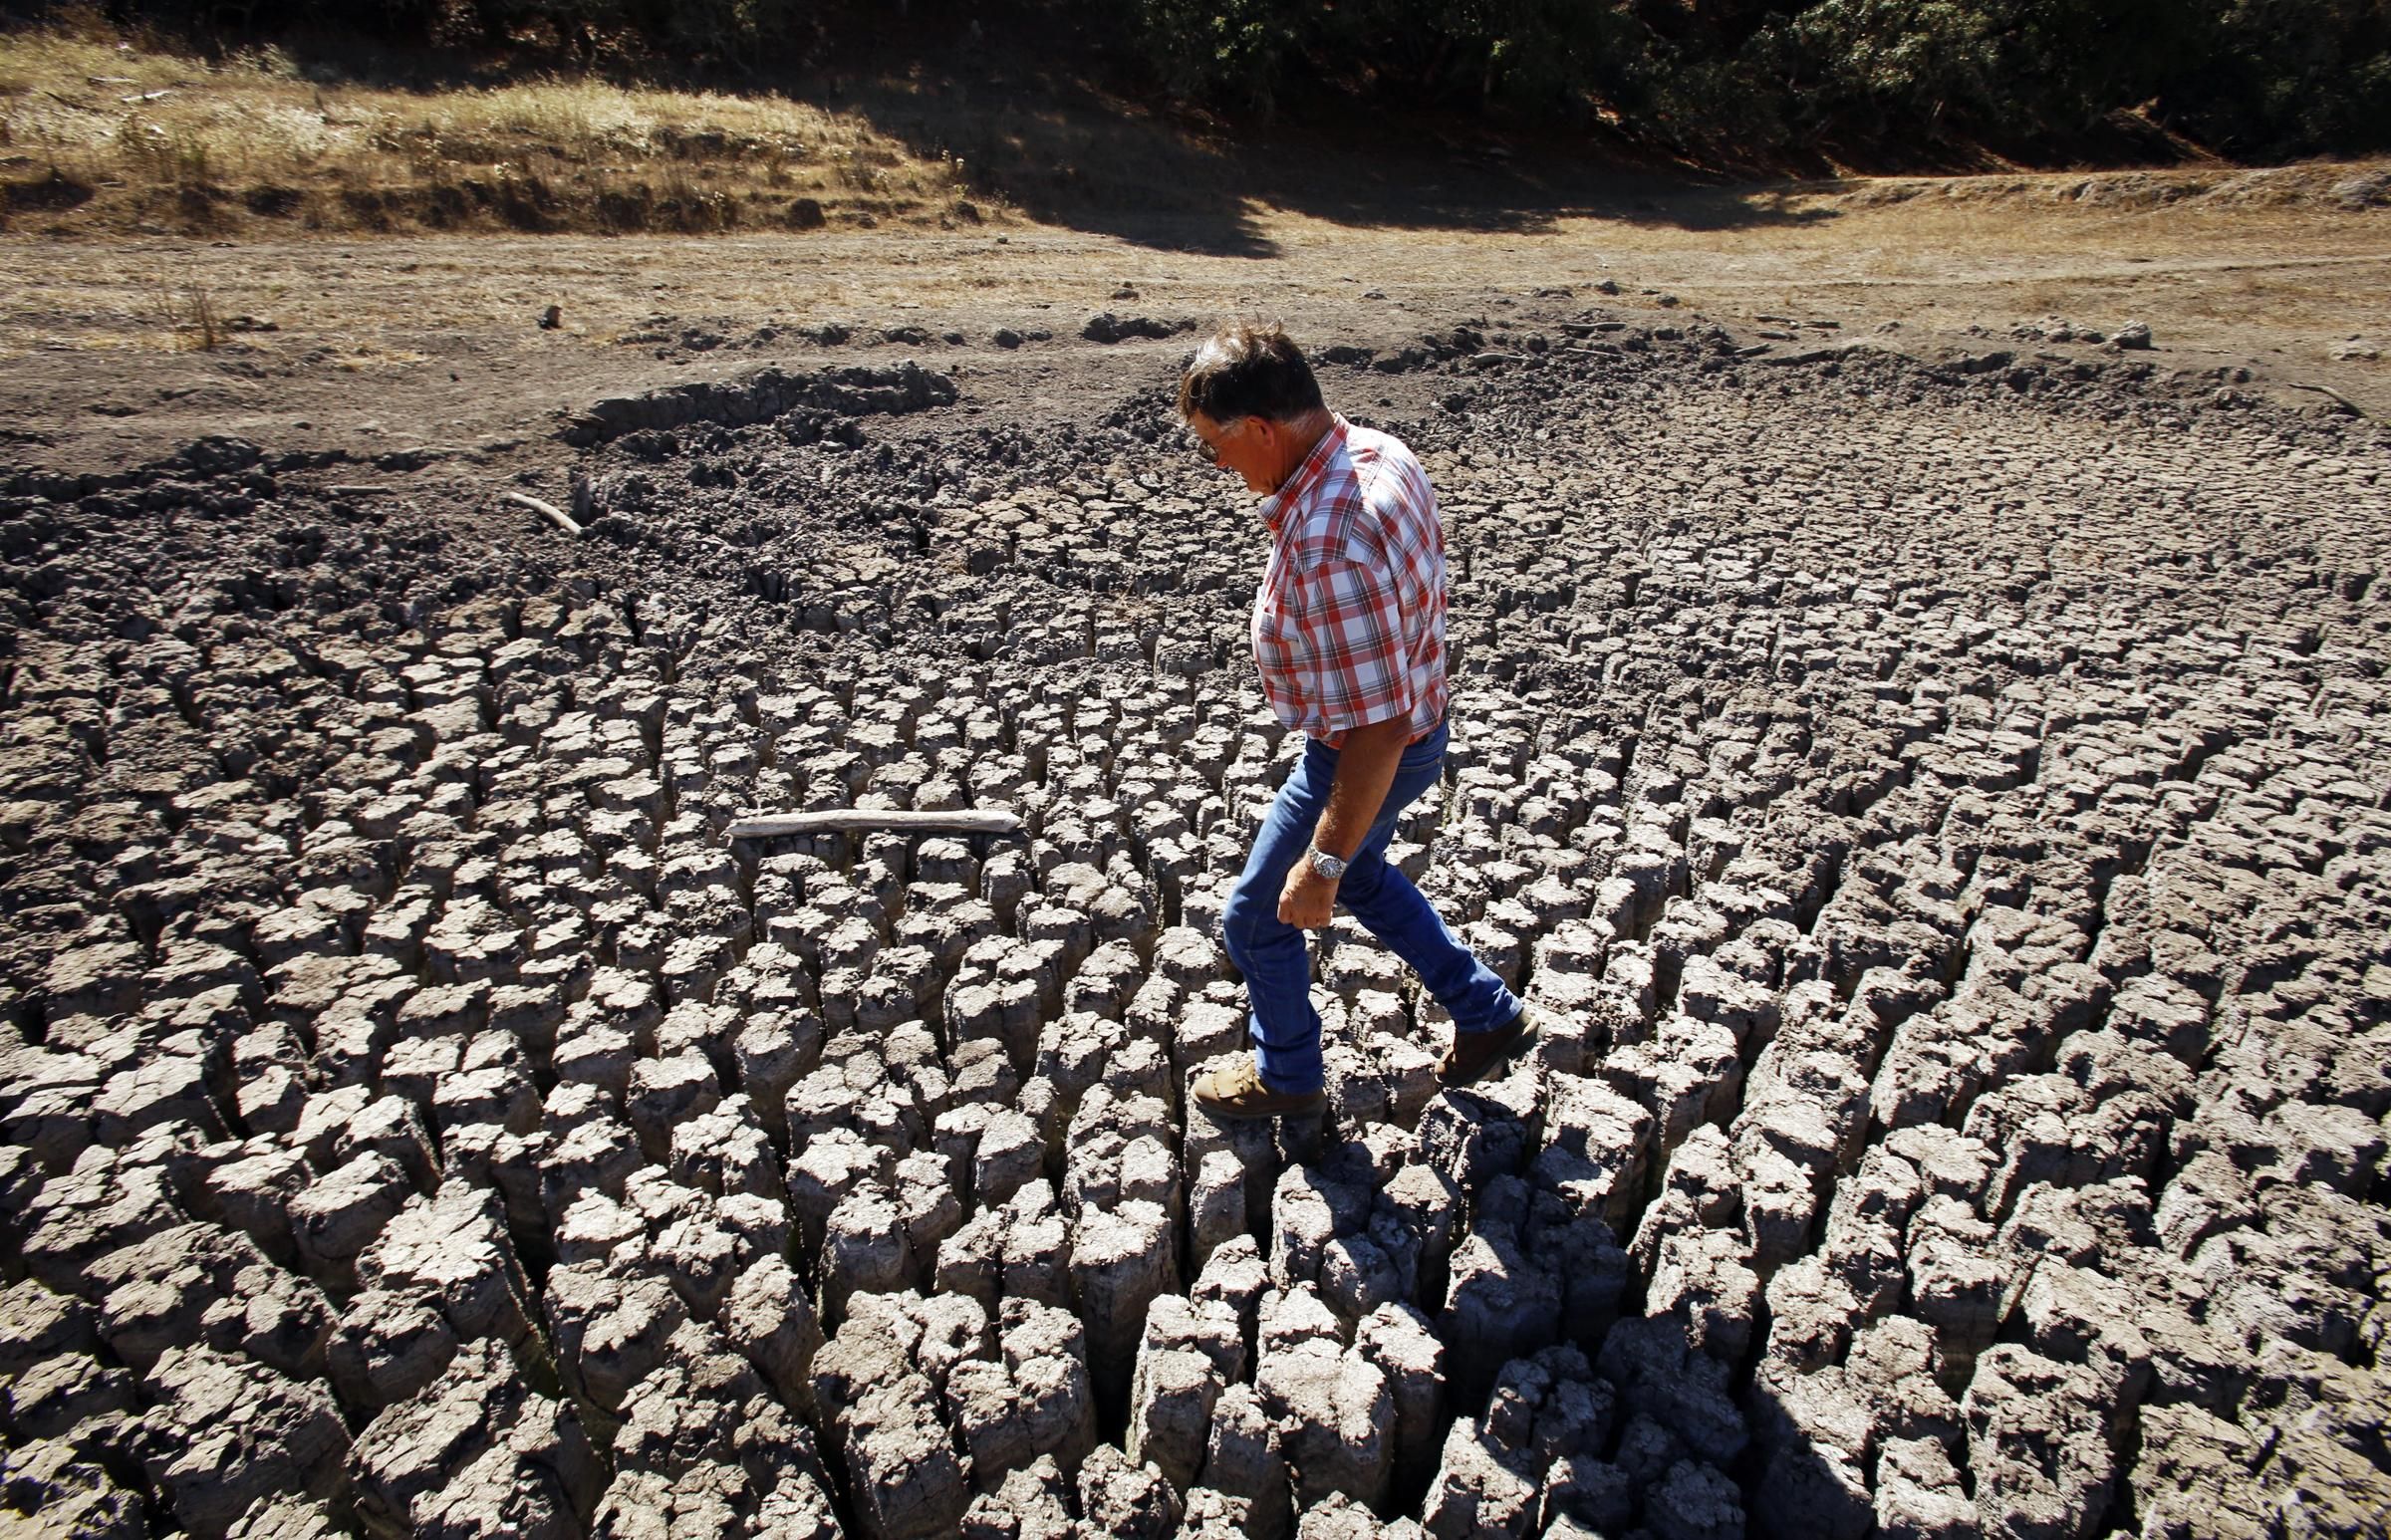 Drought conditions in California